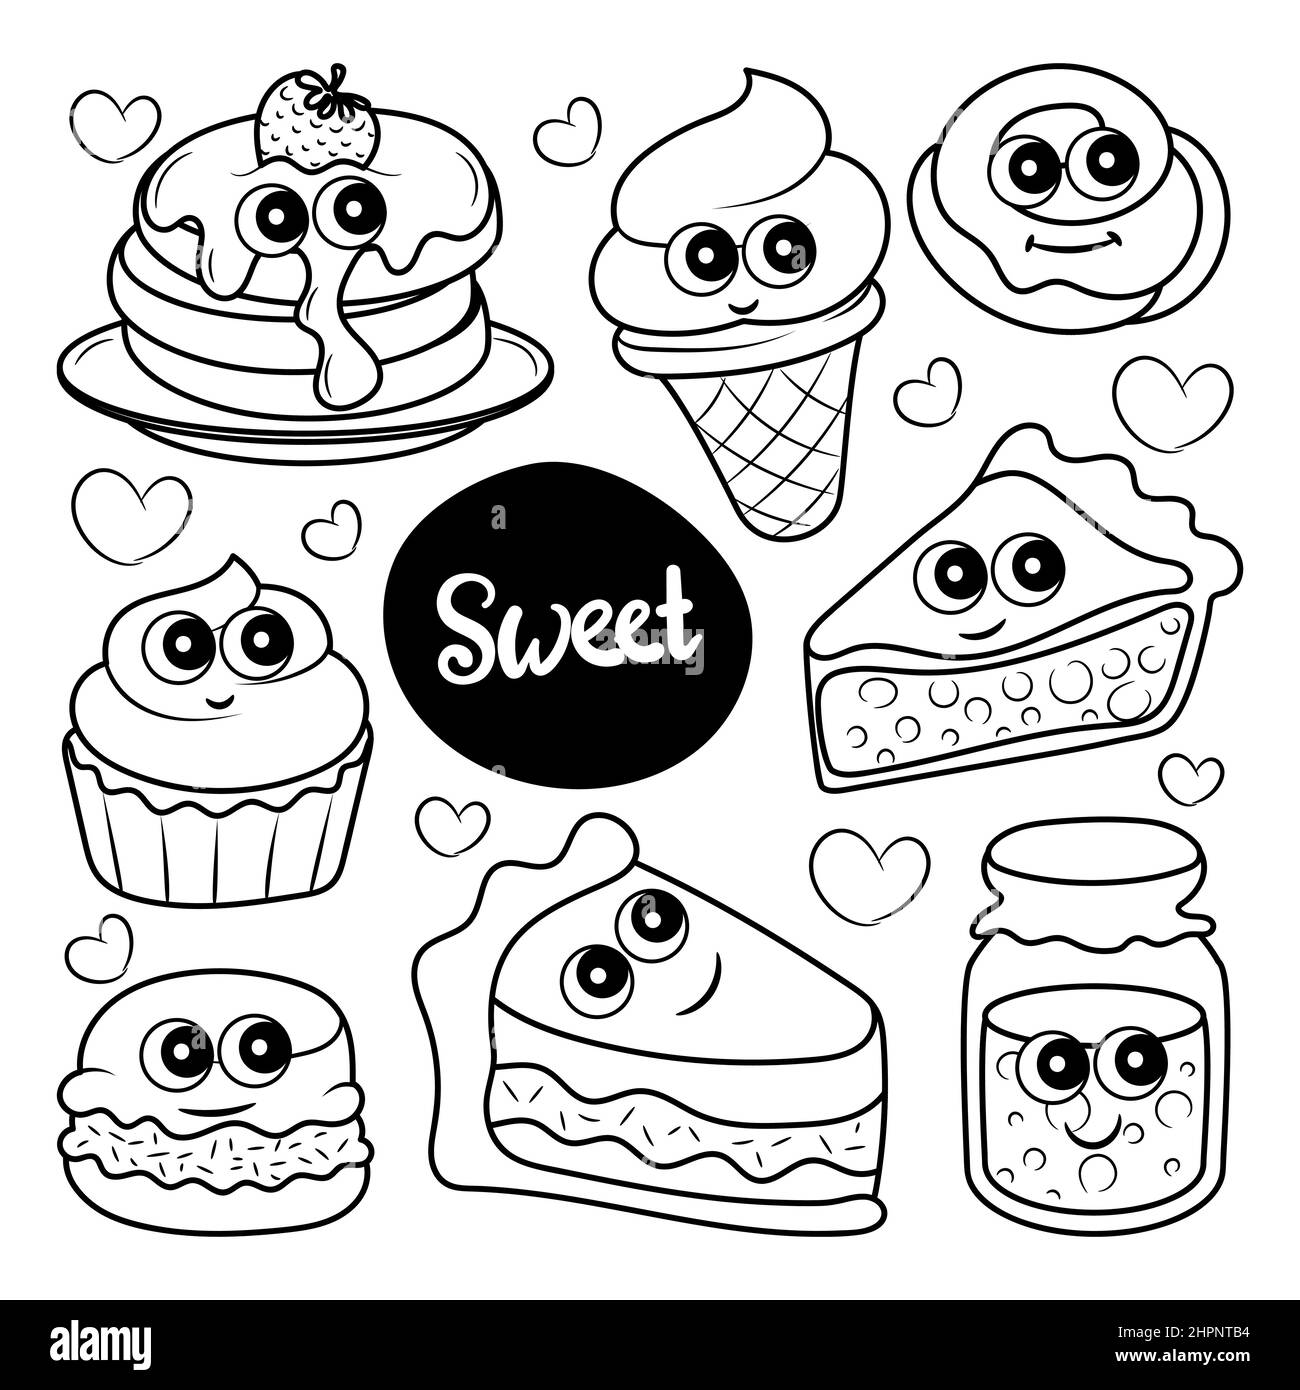 Sweets with hand drawn doodle element collections Stock Vector